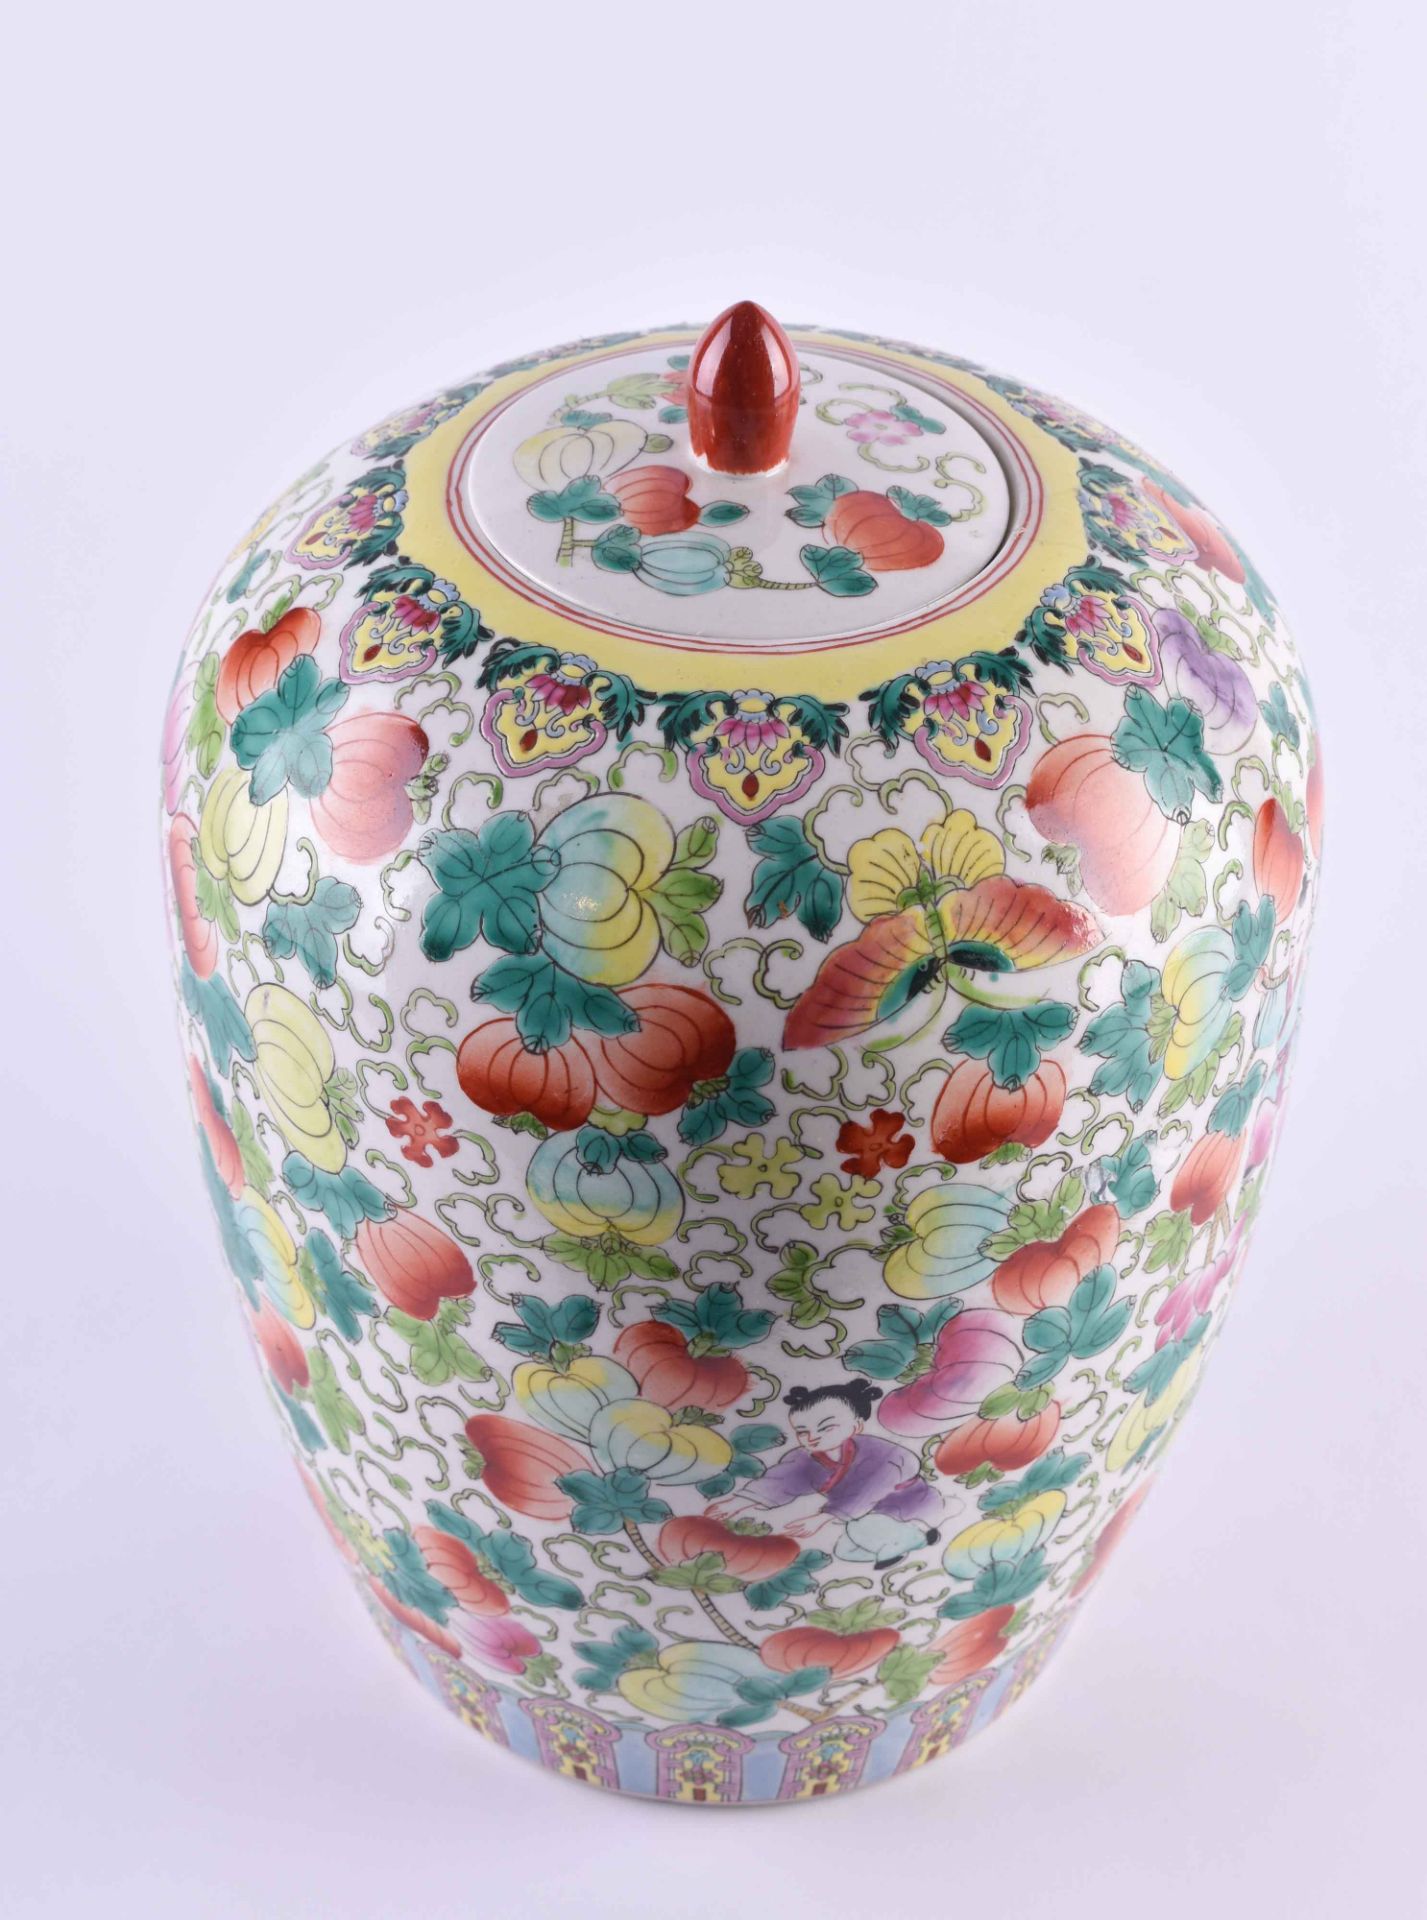 Lidded vessel China 19th /20th century - Image 4 of 6